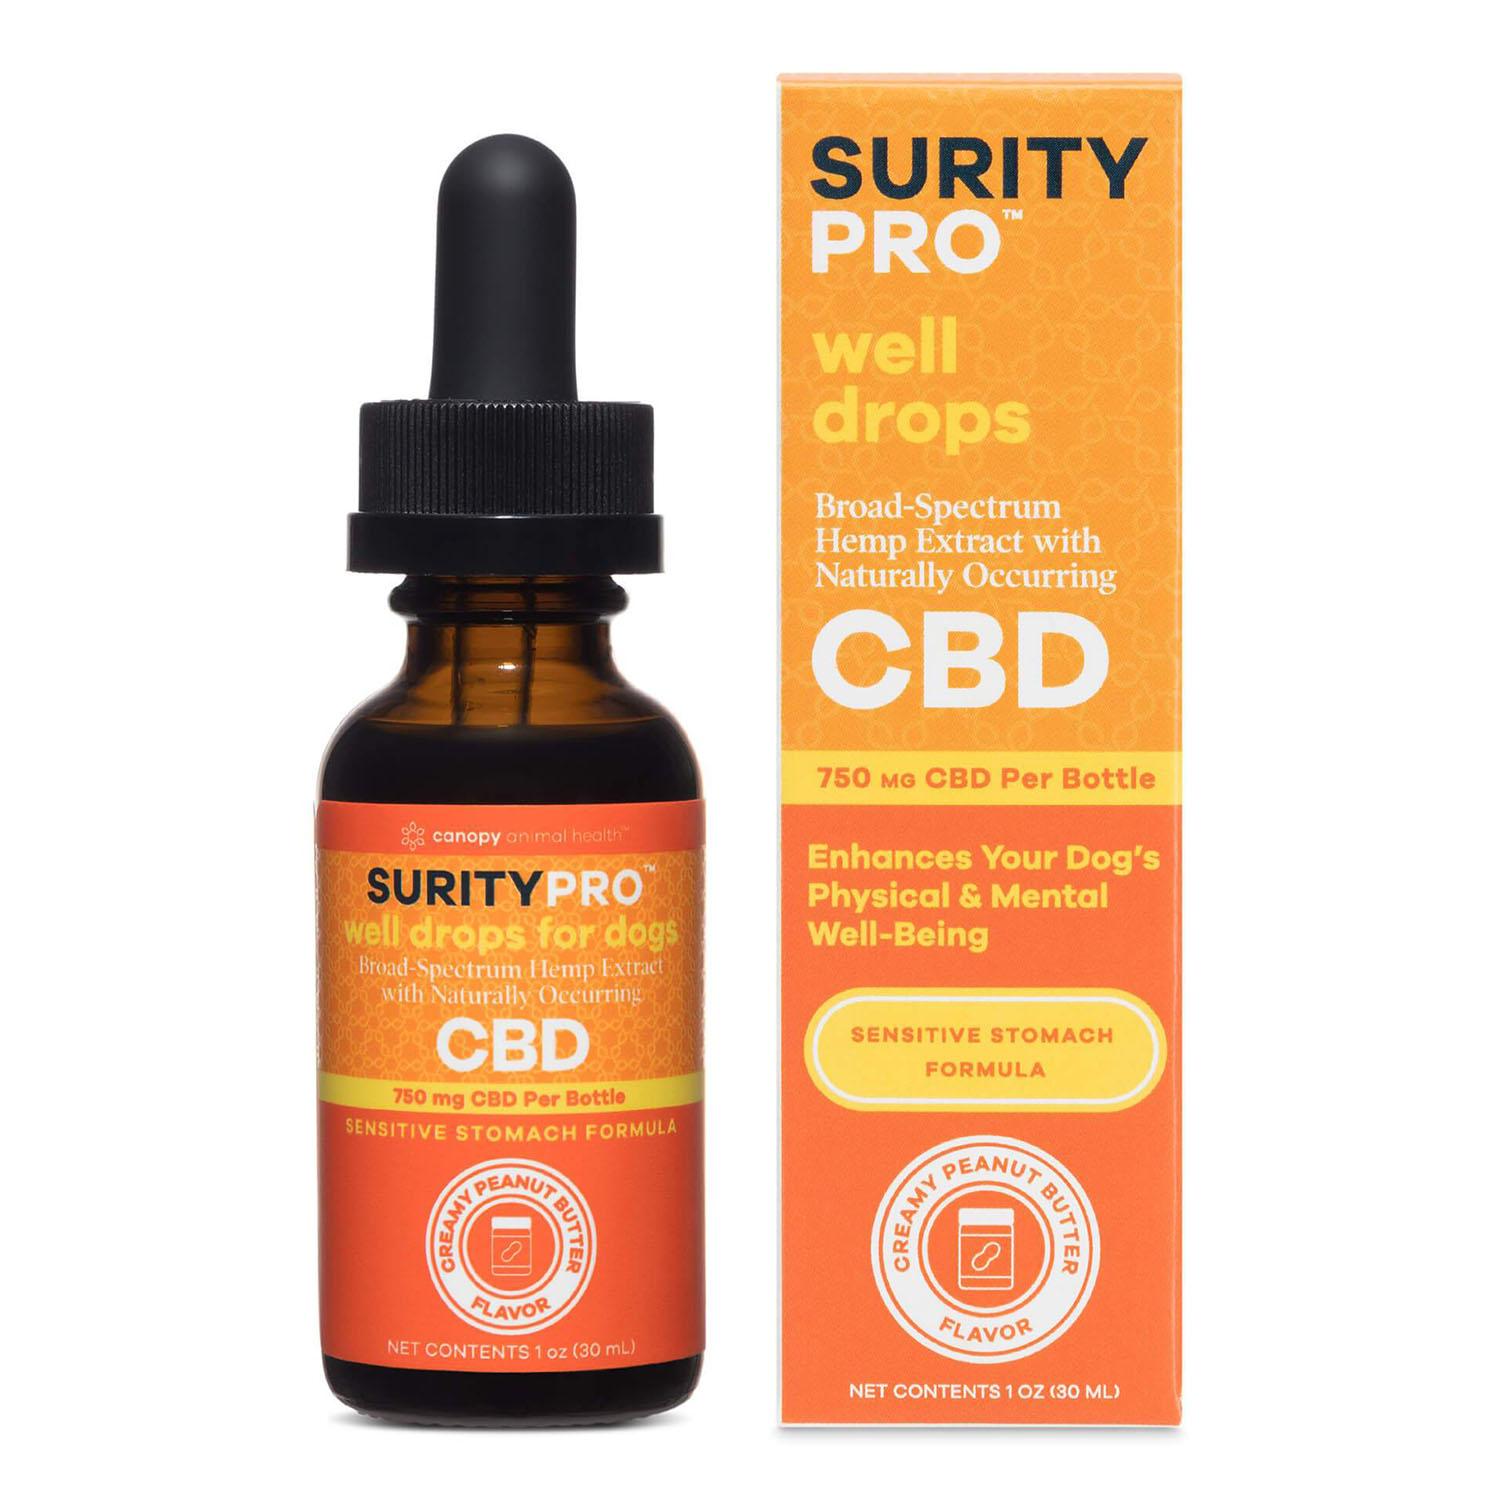 Canopy Animal Health SURITYPRO CBD Oil Well Drops for Dogs - Creamy Peanut Butter